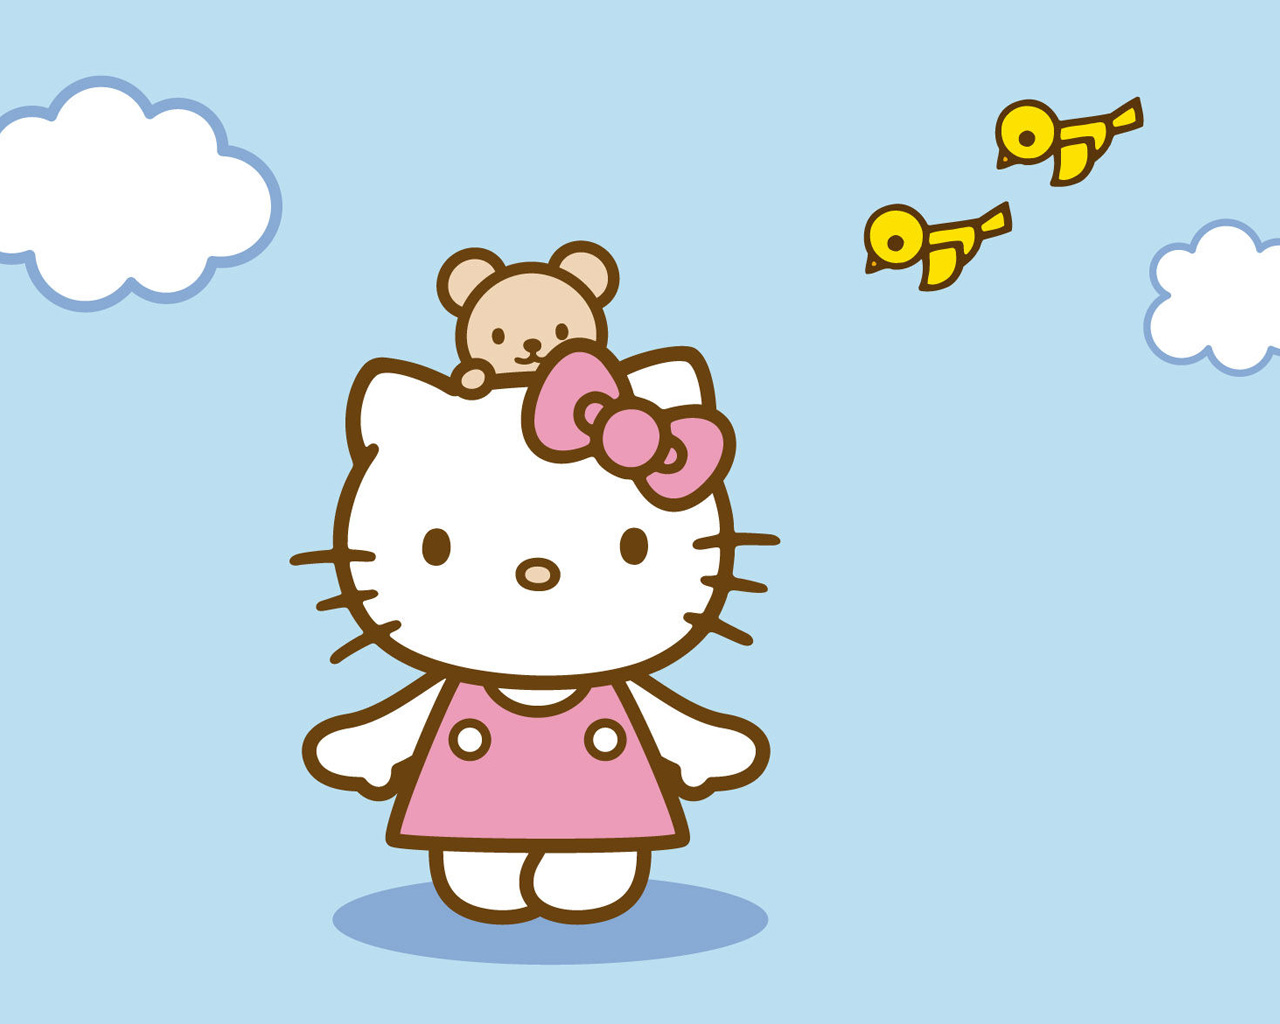 Pin Clipart Hello Kitty | Clipart Panda - Free Clipart Images